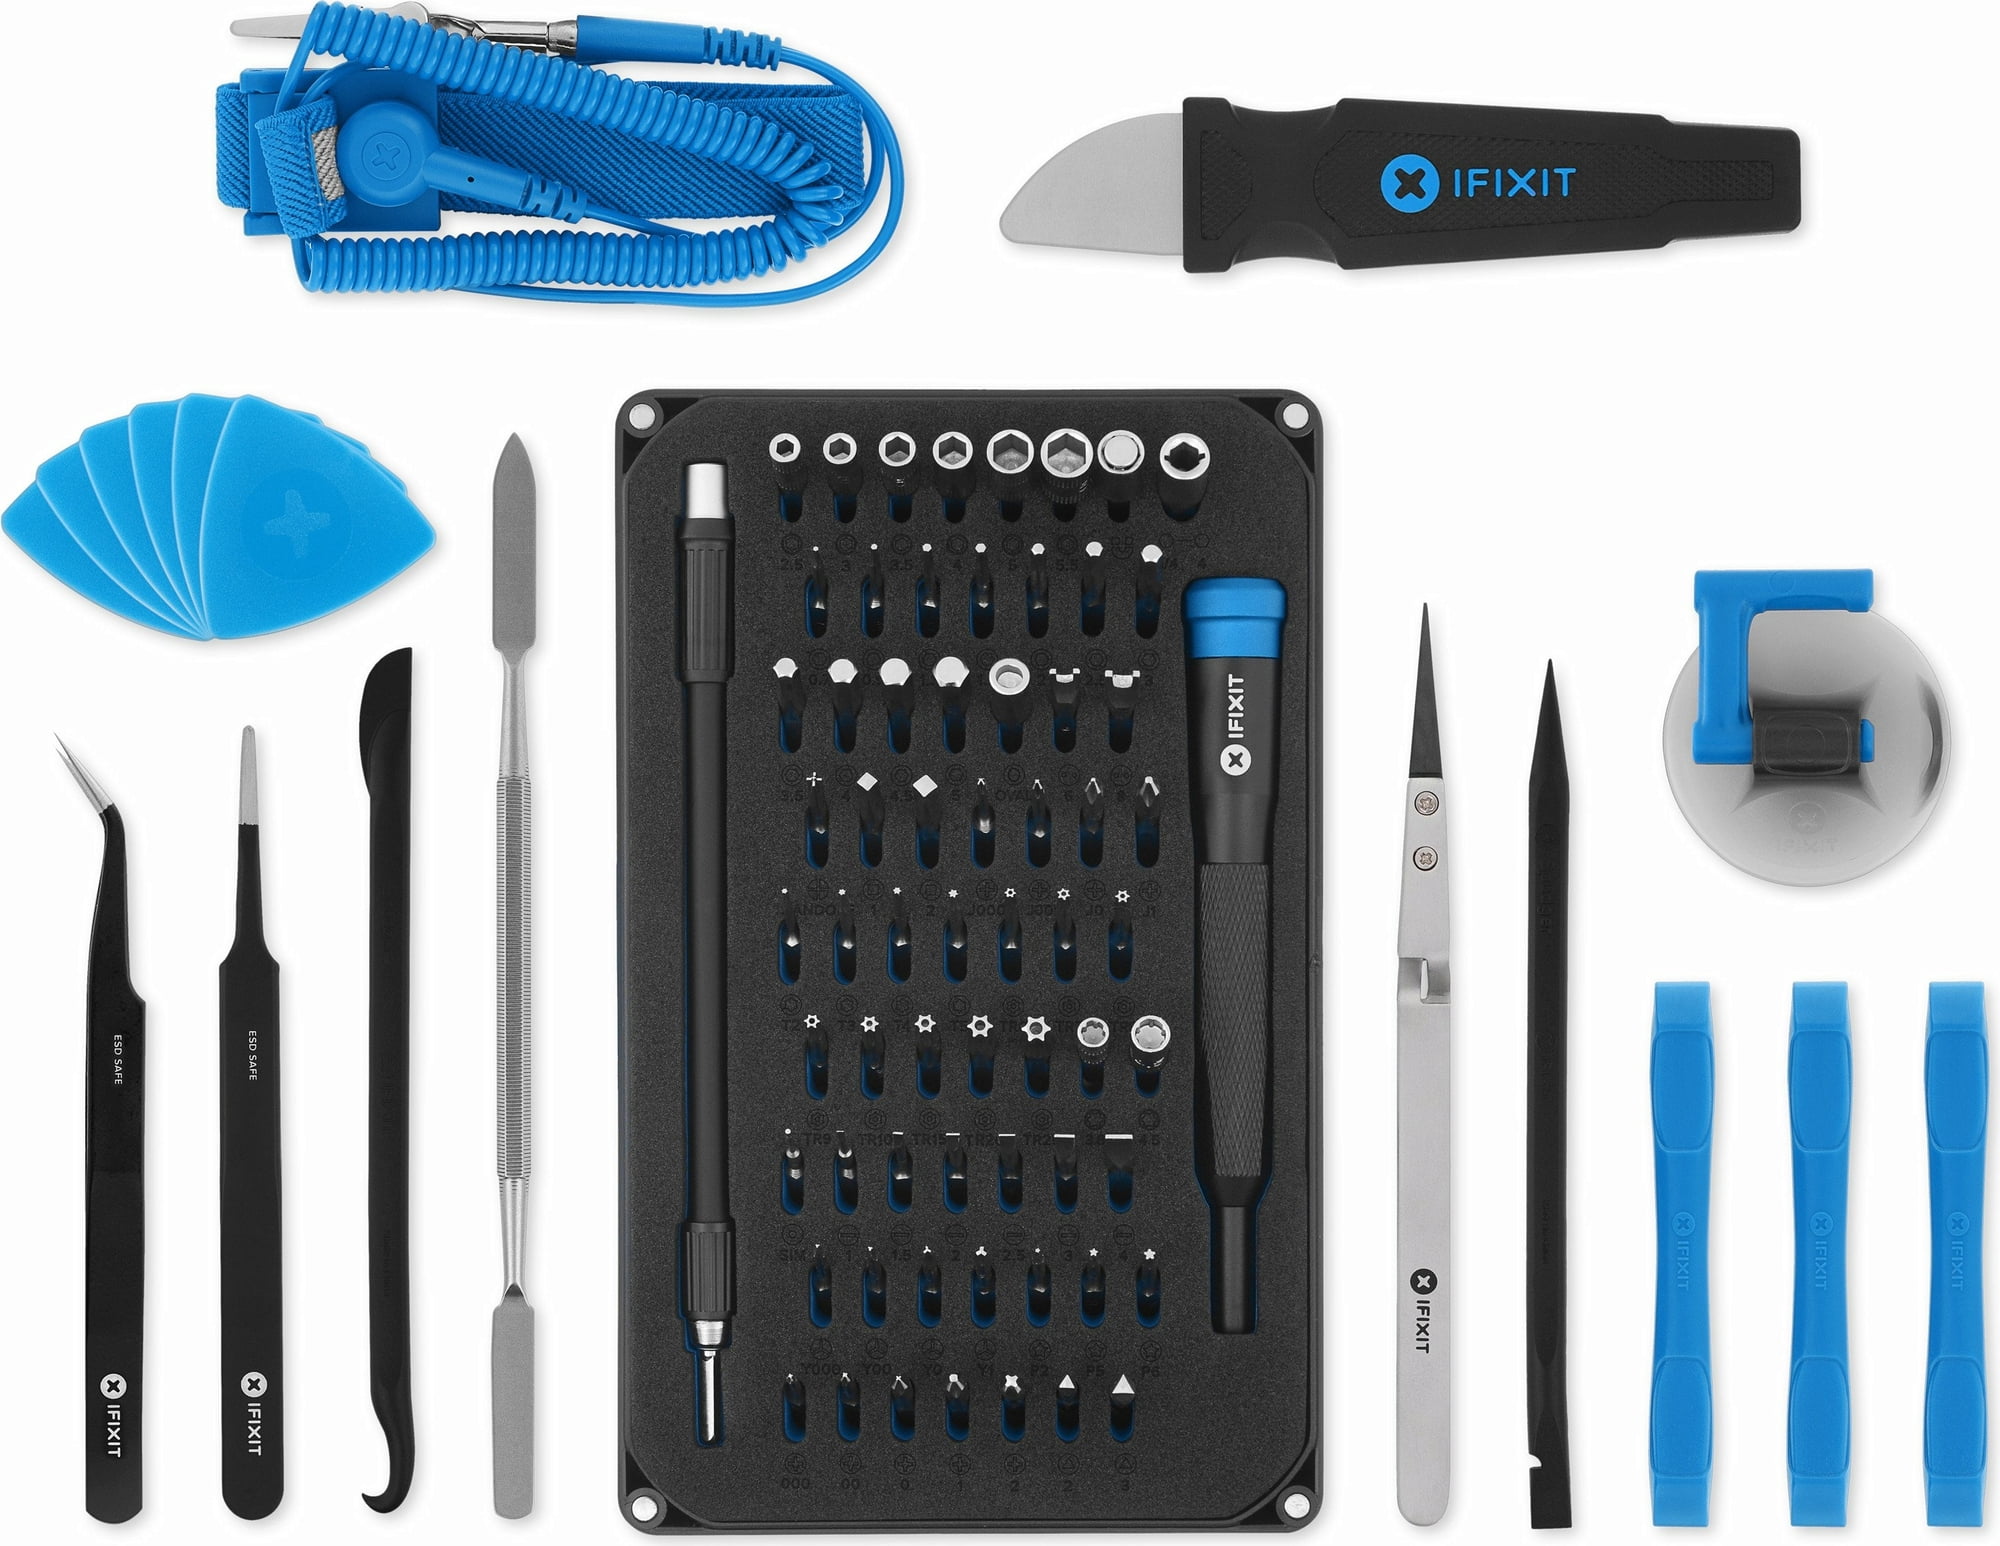 <p>Get a iFixit Pro Tech Repair Toolkit from the Infobip team</p>
